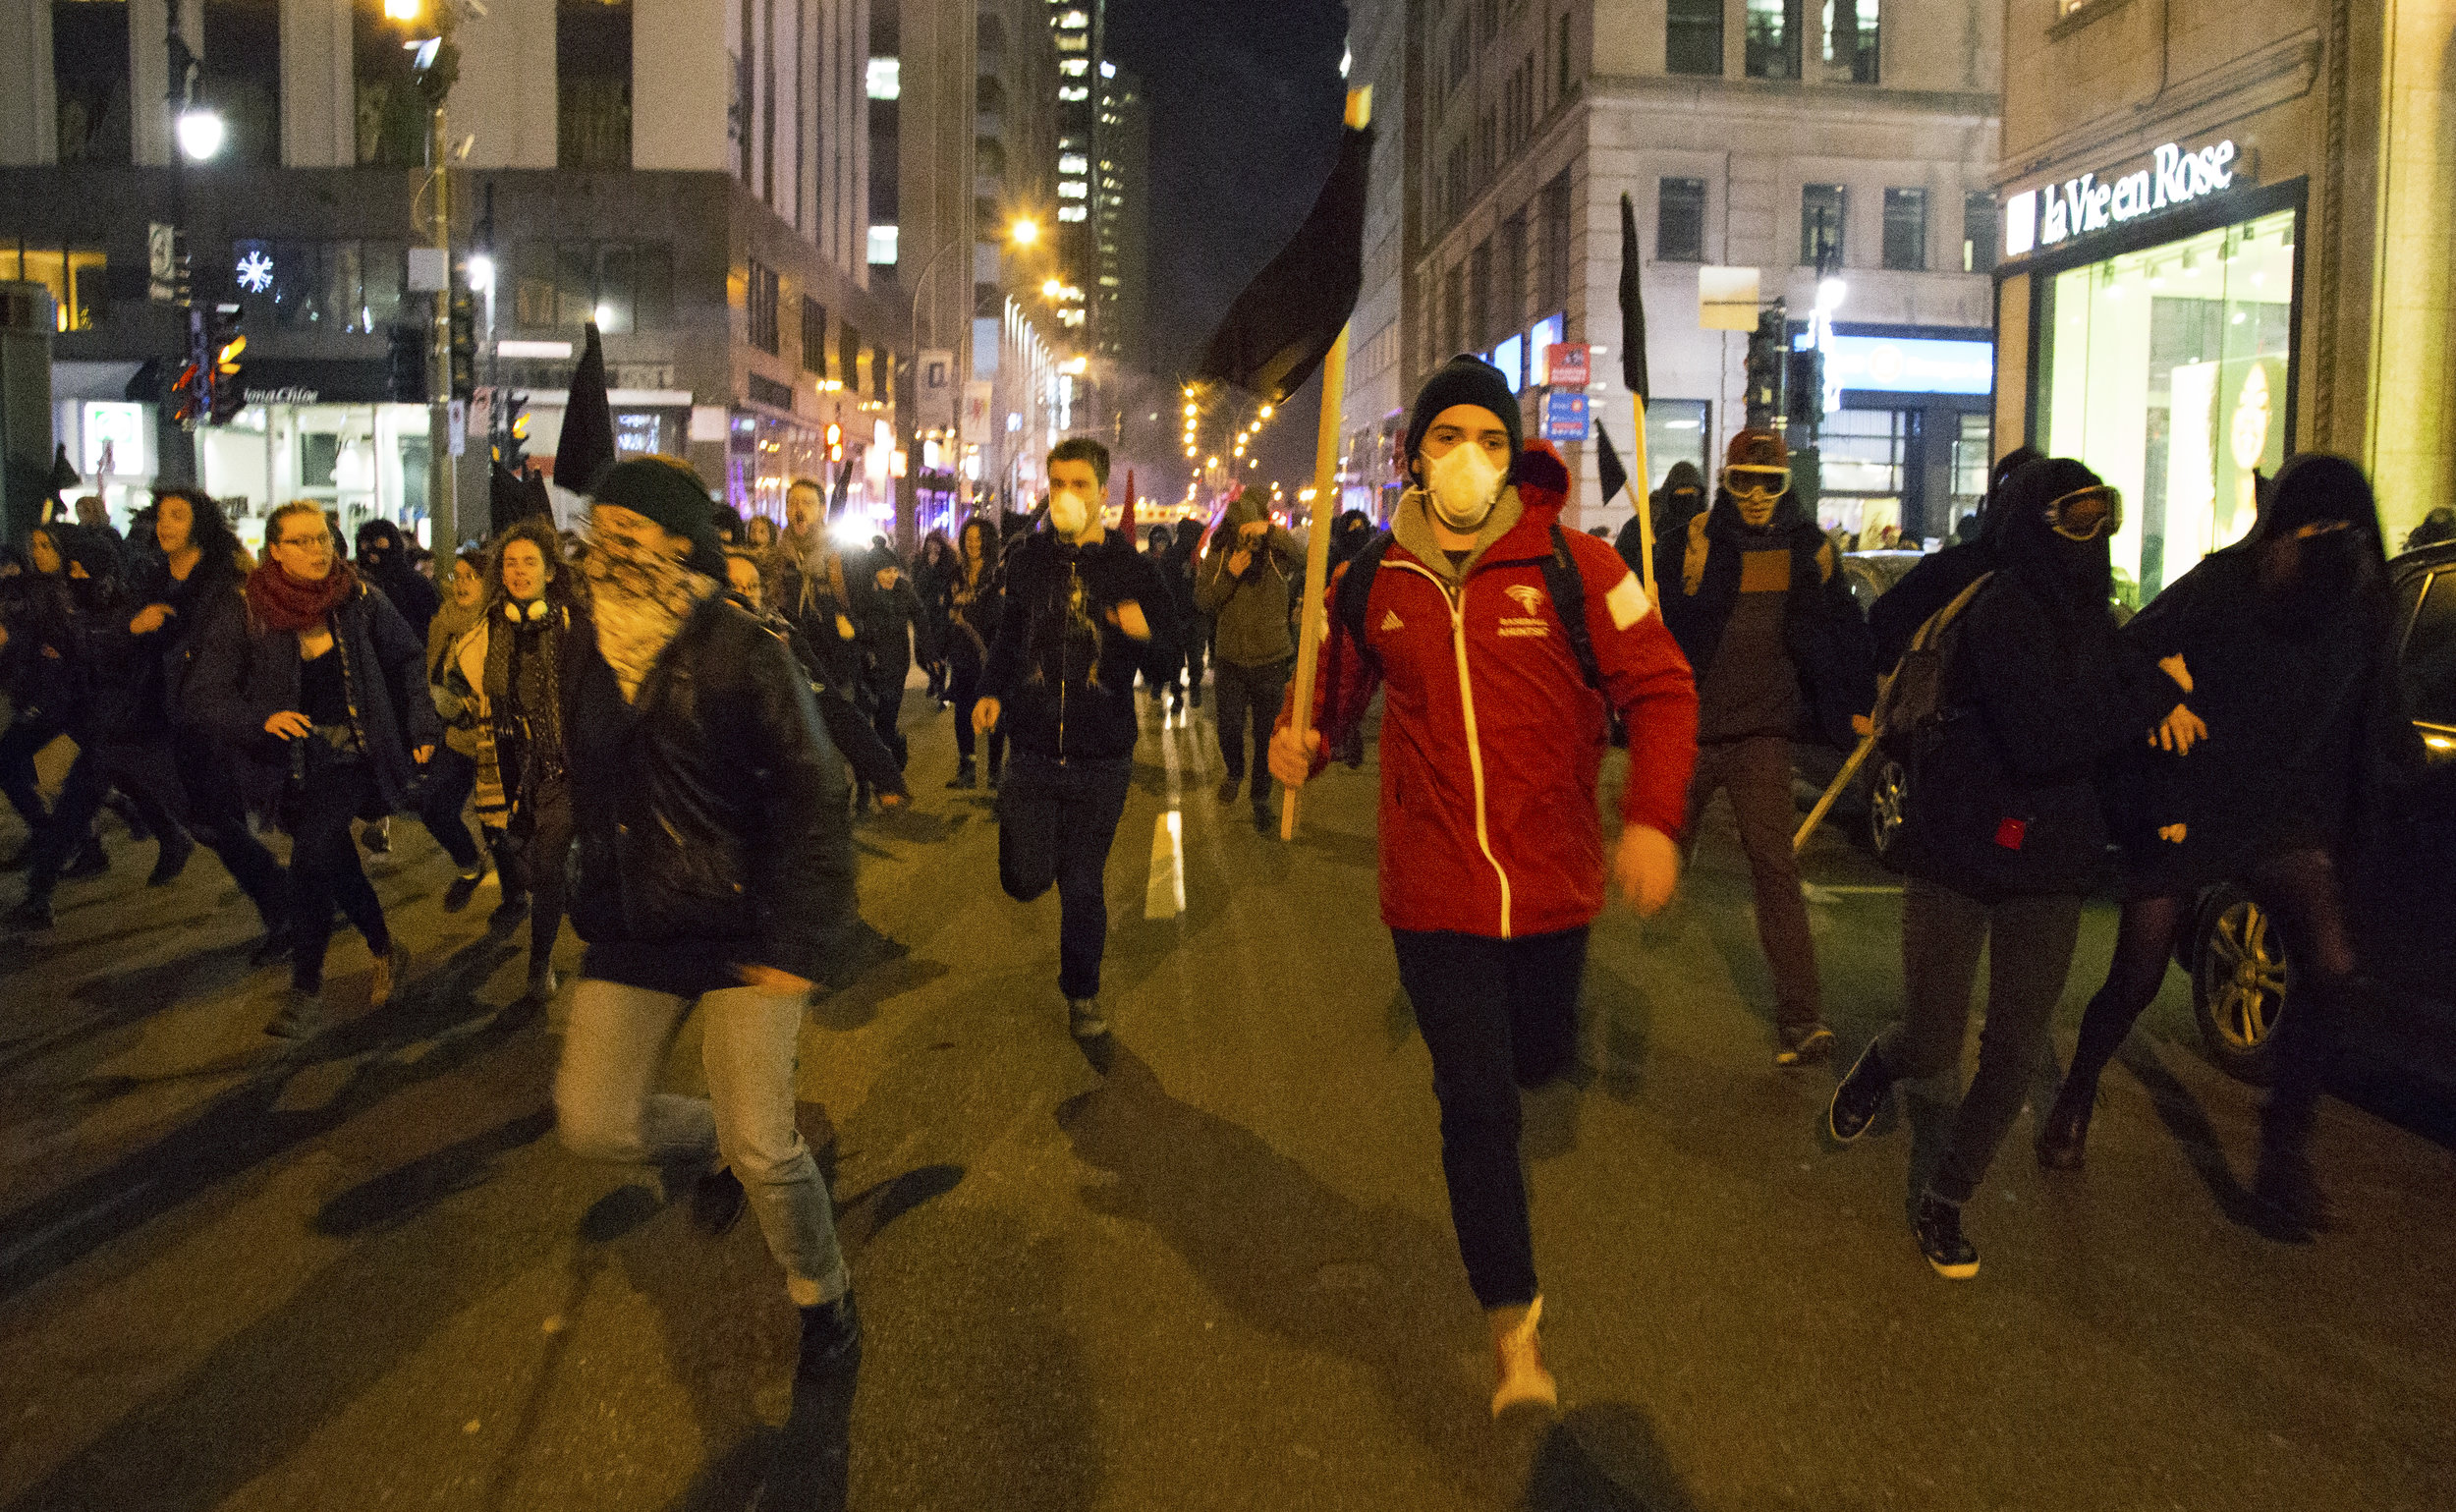  Protesters run from Montreal riot police and tear gas during a December 3 2016 anticapitalist night demonstration. &nbsp;  Full story:&nbsp;https://thelinknewspaper.ca/article/anti-austerity-demonstrators-chased-by-police-through-downtown-montreal 